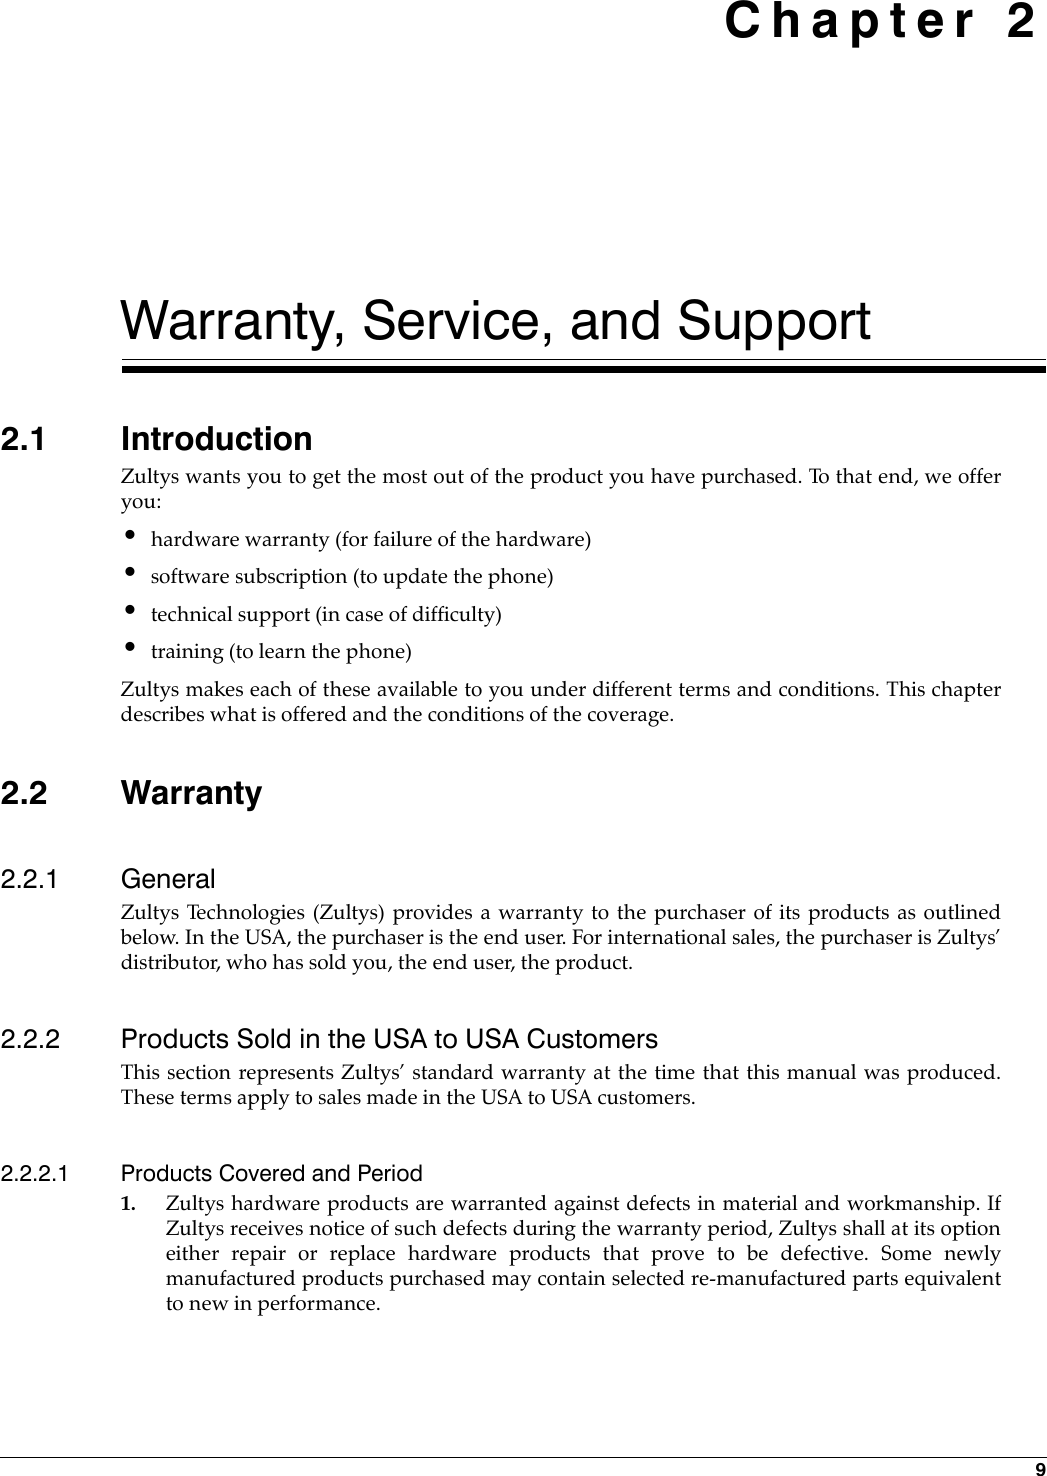  9Chapter 2Warranty, Service, and Support2.1 IntroductionZultys wants you to get the most out of the product you have purchased. To that end, we offeryou:•hardware warranty (for failure of the hardware)•software subscription (to update the phone)•technical support (in case of difficulty)•training (to learn the phone)Zultys makes each of these available to you under different terms and conditions. This chapterdescribes what is offered and the conditions of the coverage.2.2 Warranty2.2.1 GeneralZultys Technologies (Zultys) provides a warranty to the purchaser of its products as outlinedbelow. In the USA, the purchaser is the end user. For international sales, the purchaser is Zultys’distributor, who has sold you, the end user, the product.2.2.2 Products Sold in the USA to USA CustomersThis section represents Zultys’ standard warranty at the time that this manual was produced.These terms apply to sales made in the USA to USA customers.2.2.2.1 Products Covered and Period1. Zultys hardware products are warranted against defects in material and workmanship. IfZultys receives notice of such defects during the warranty period, Zultys shall at its optioneither repair or replace hardware products that prove to be defective. Some newlymanufactured products purchased may contain selected re-manufactured parts equivalentto new in performance.